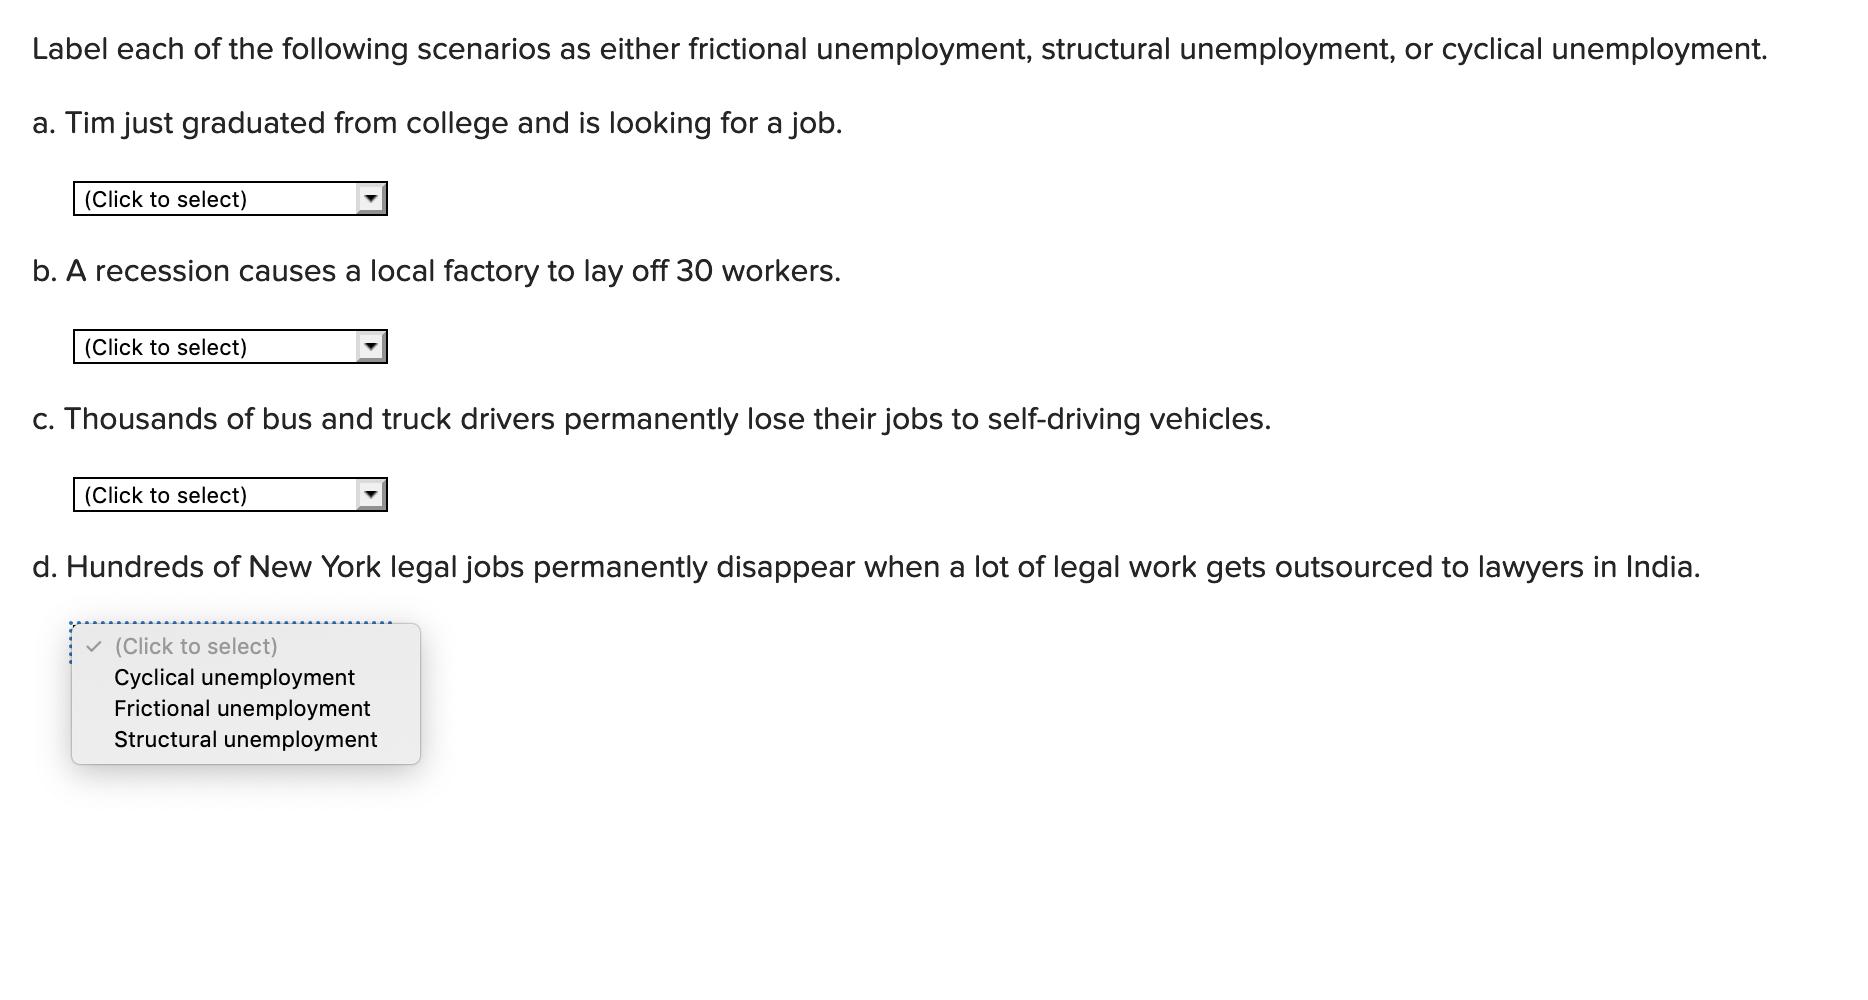 Label each of the following scenarios as either frictional unemployment, structural unemployment, or cyclical